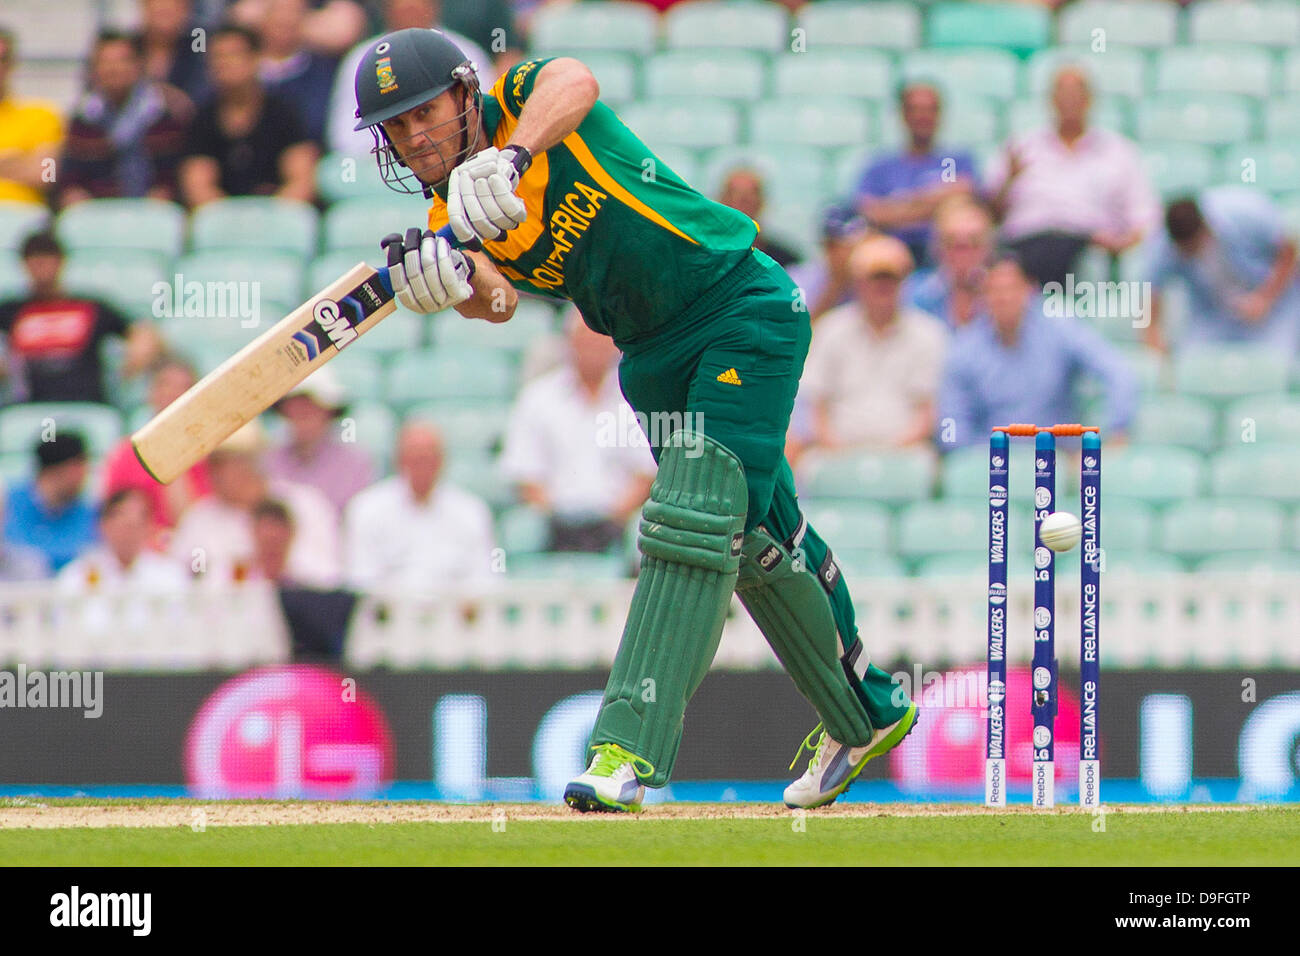 South Africas Faf Du Plessis High Resolution Stock Photography And Images Alamy